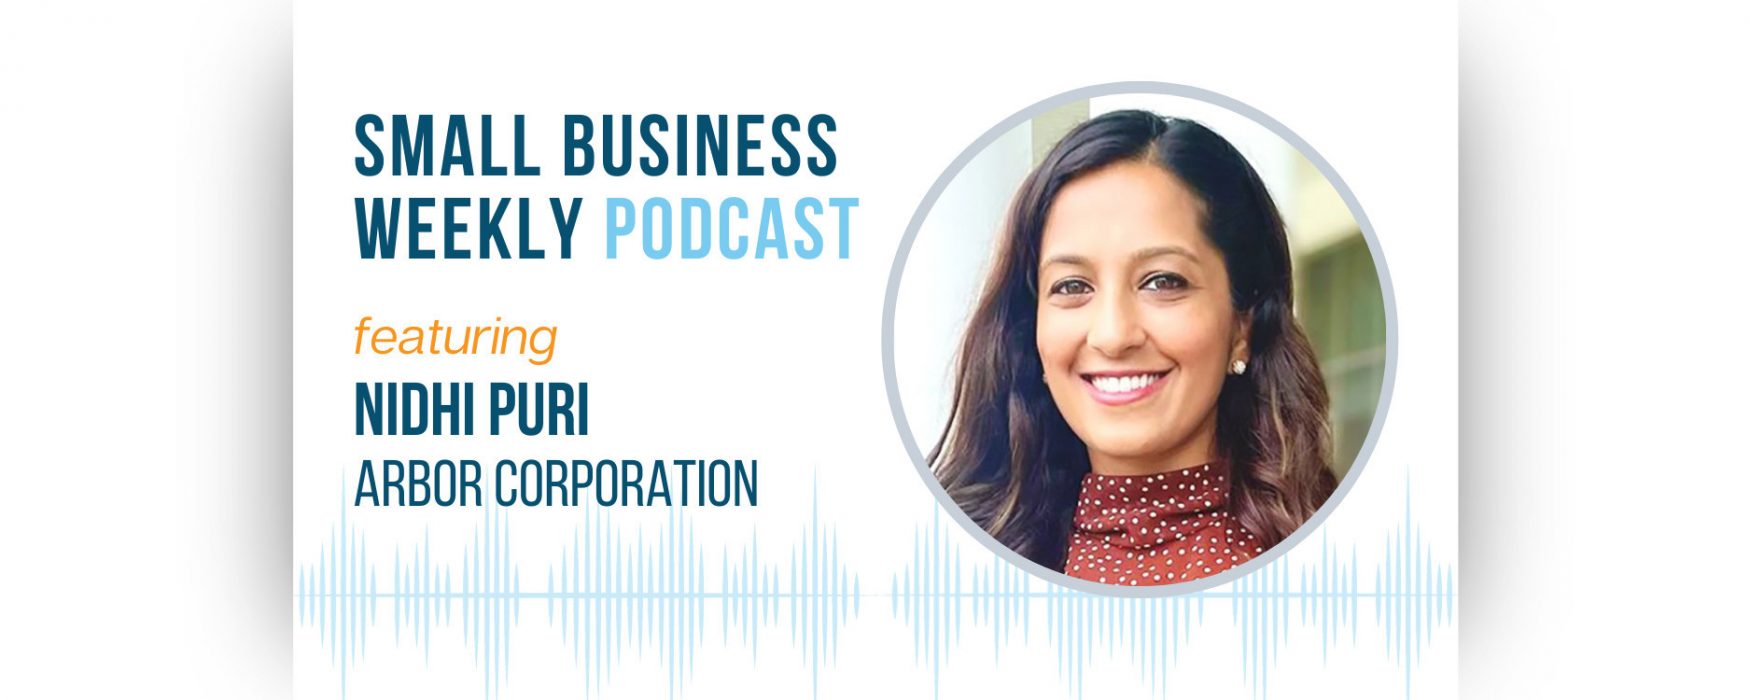 Small Business Weekly podcast featuring Nidhi Puri